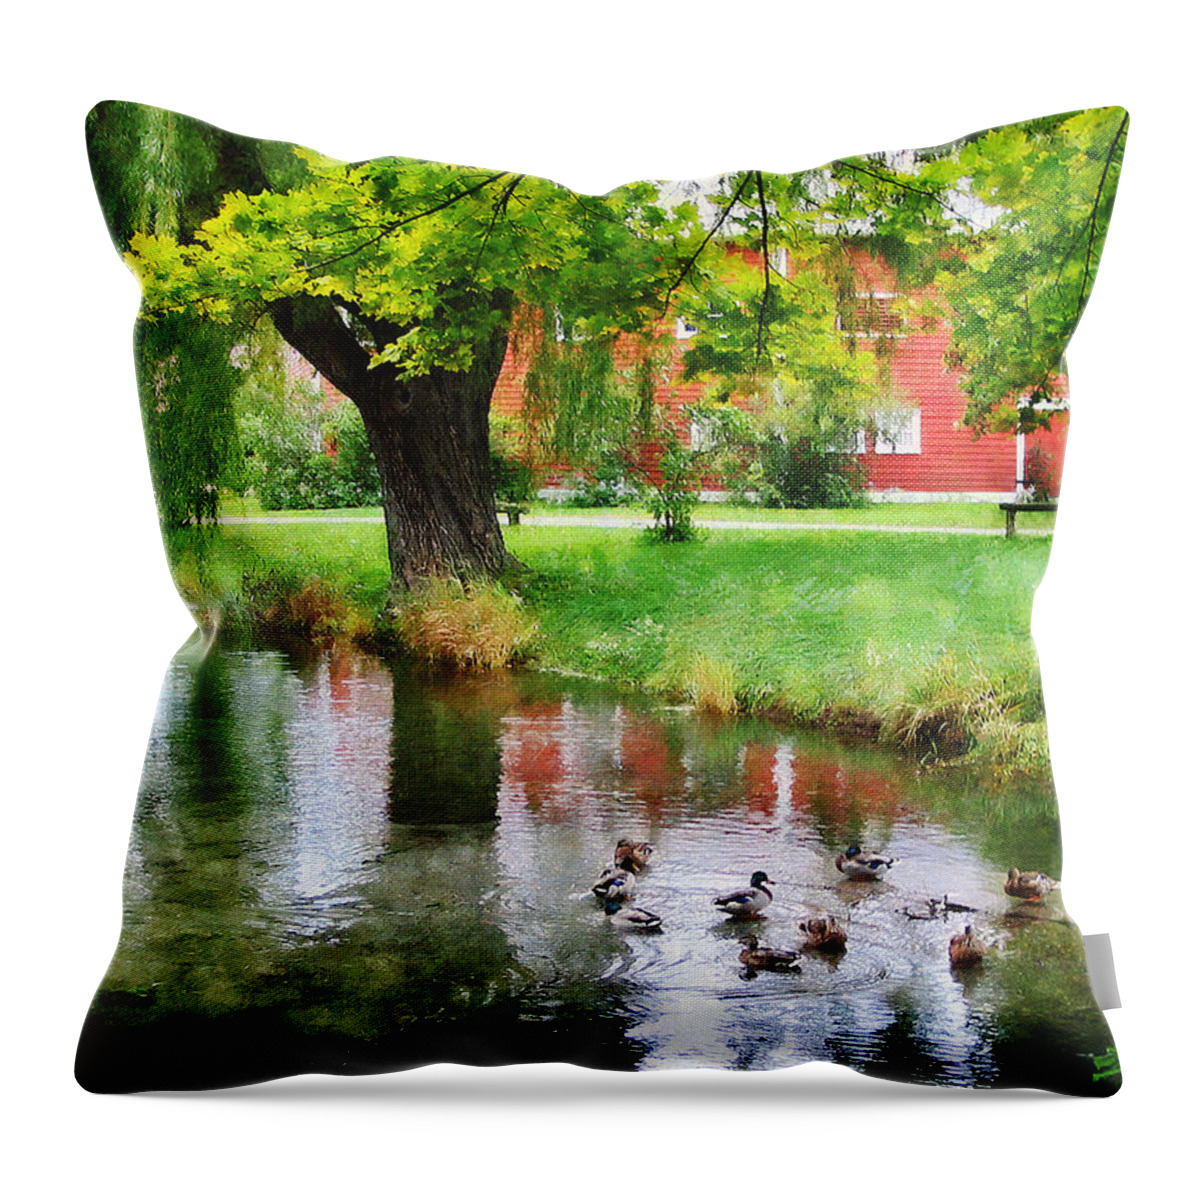 Ducks Throw Pillow featuring the photograph Ducks on Pond by Susan Savad